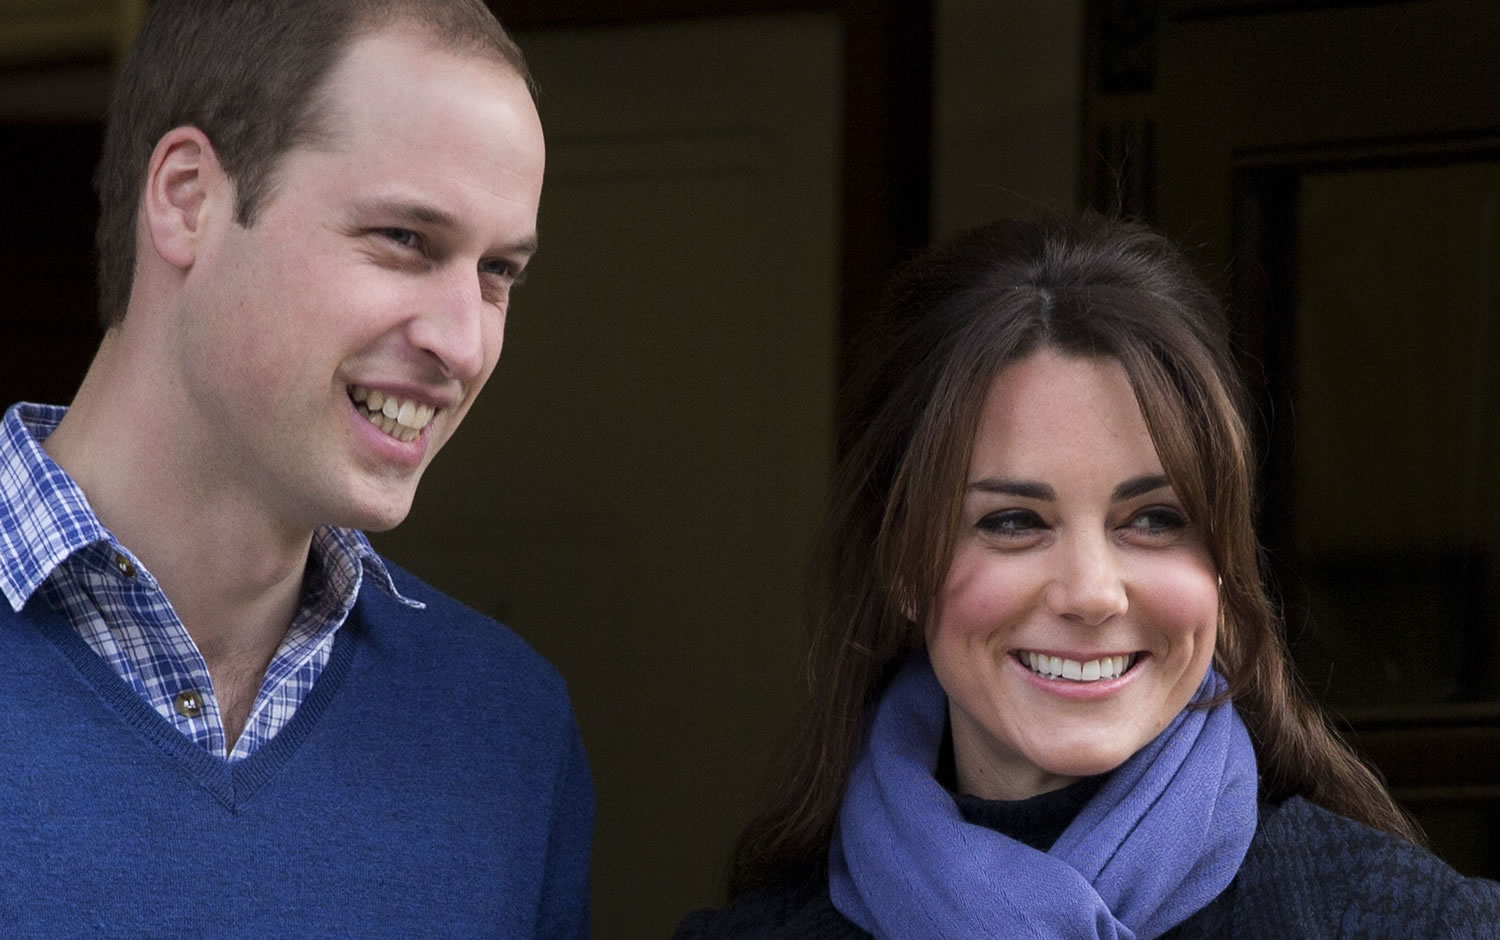 Jurors at Britain's phone hacking trial have heard transcripts Thursday intercepted messages left by Prince William, left, on Kate Middleton's phone, in which he calls her &quot;babykins&quot; and jokes about almost being shot during a military training exercise.